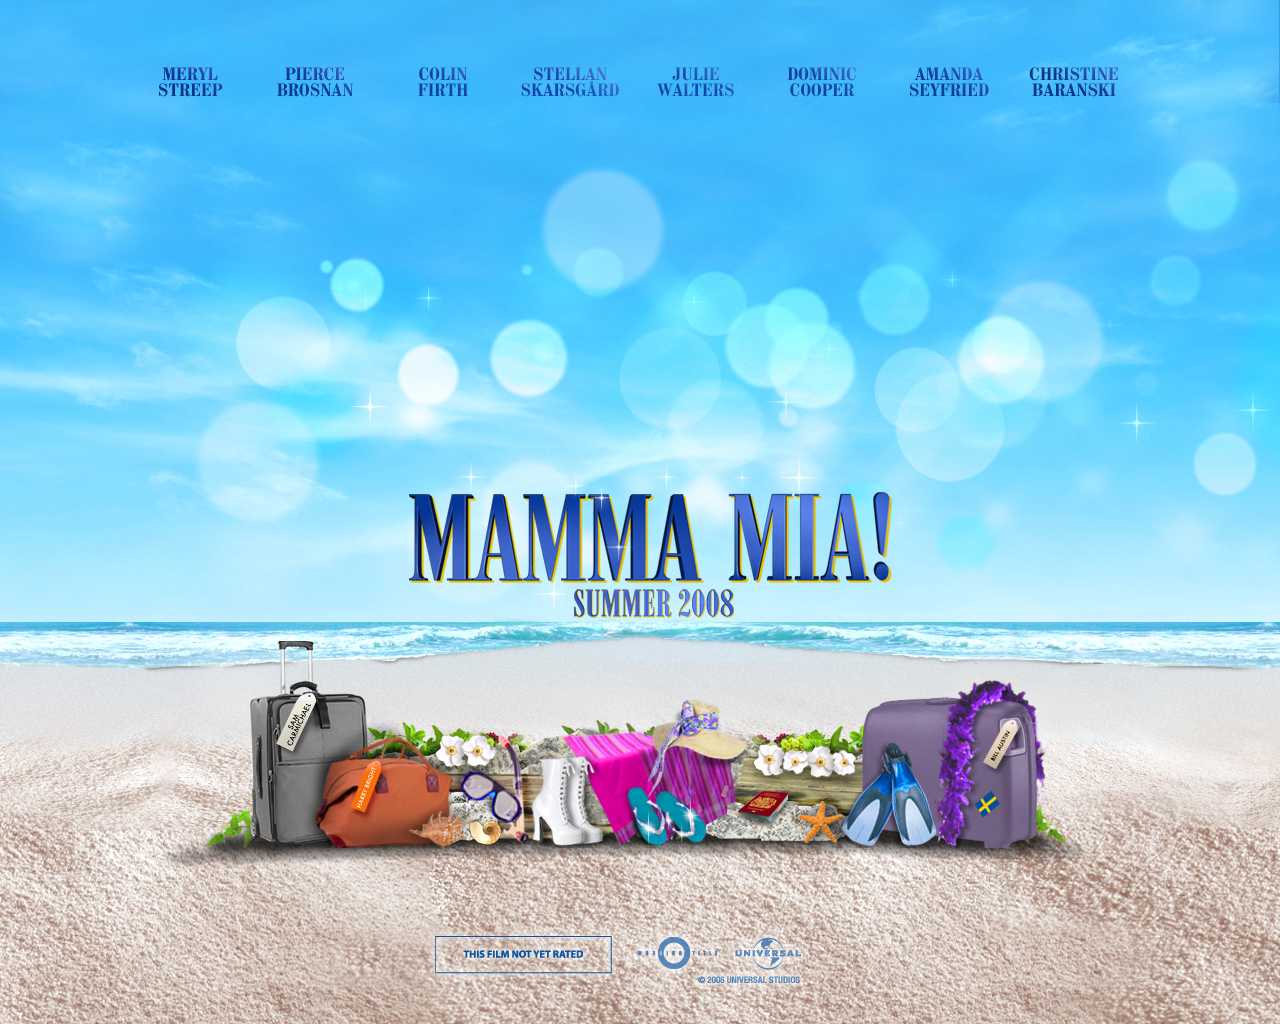 Images for abba songs mamma mia